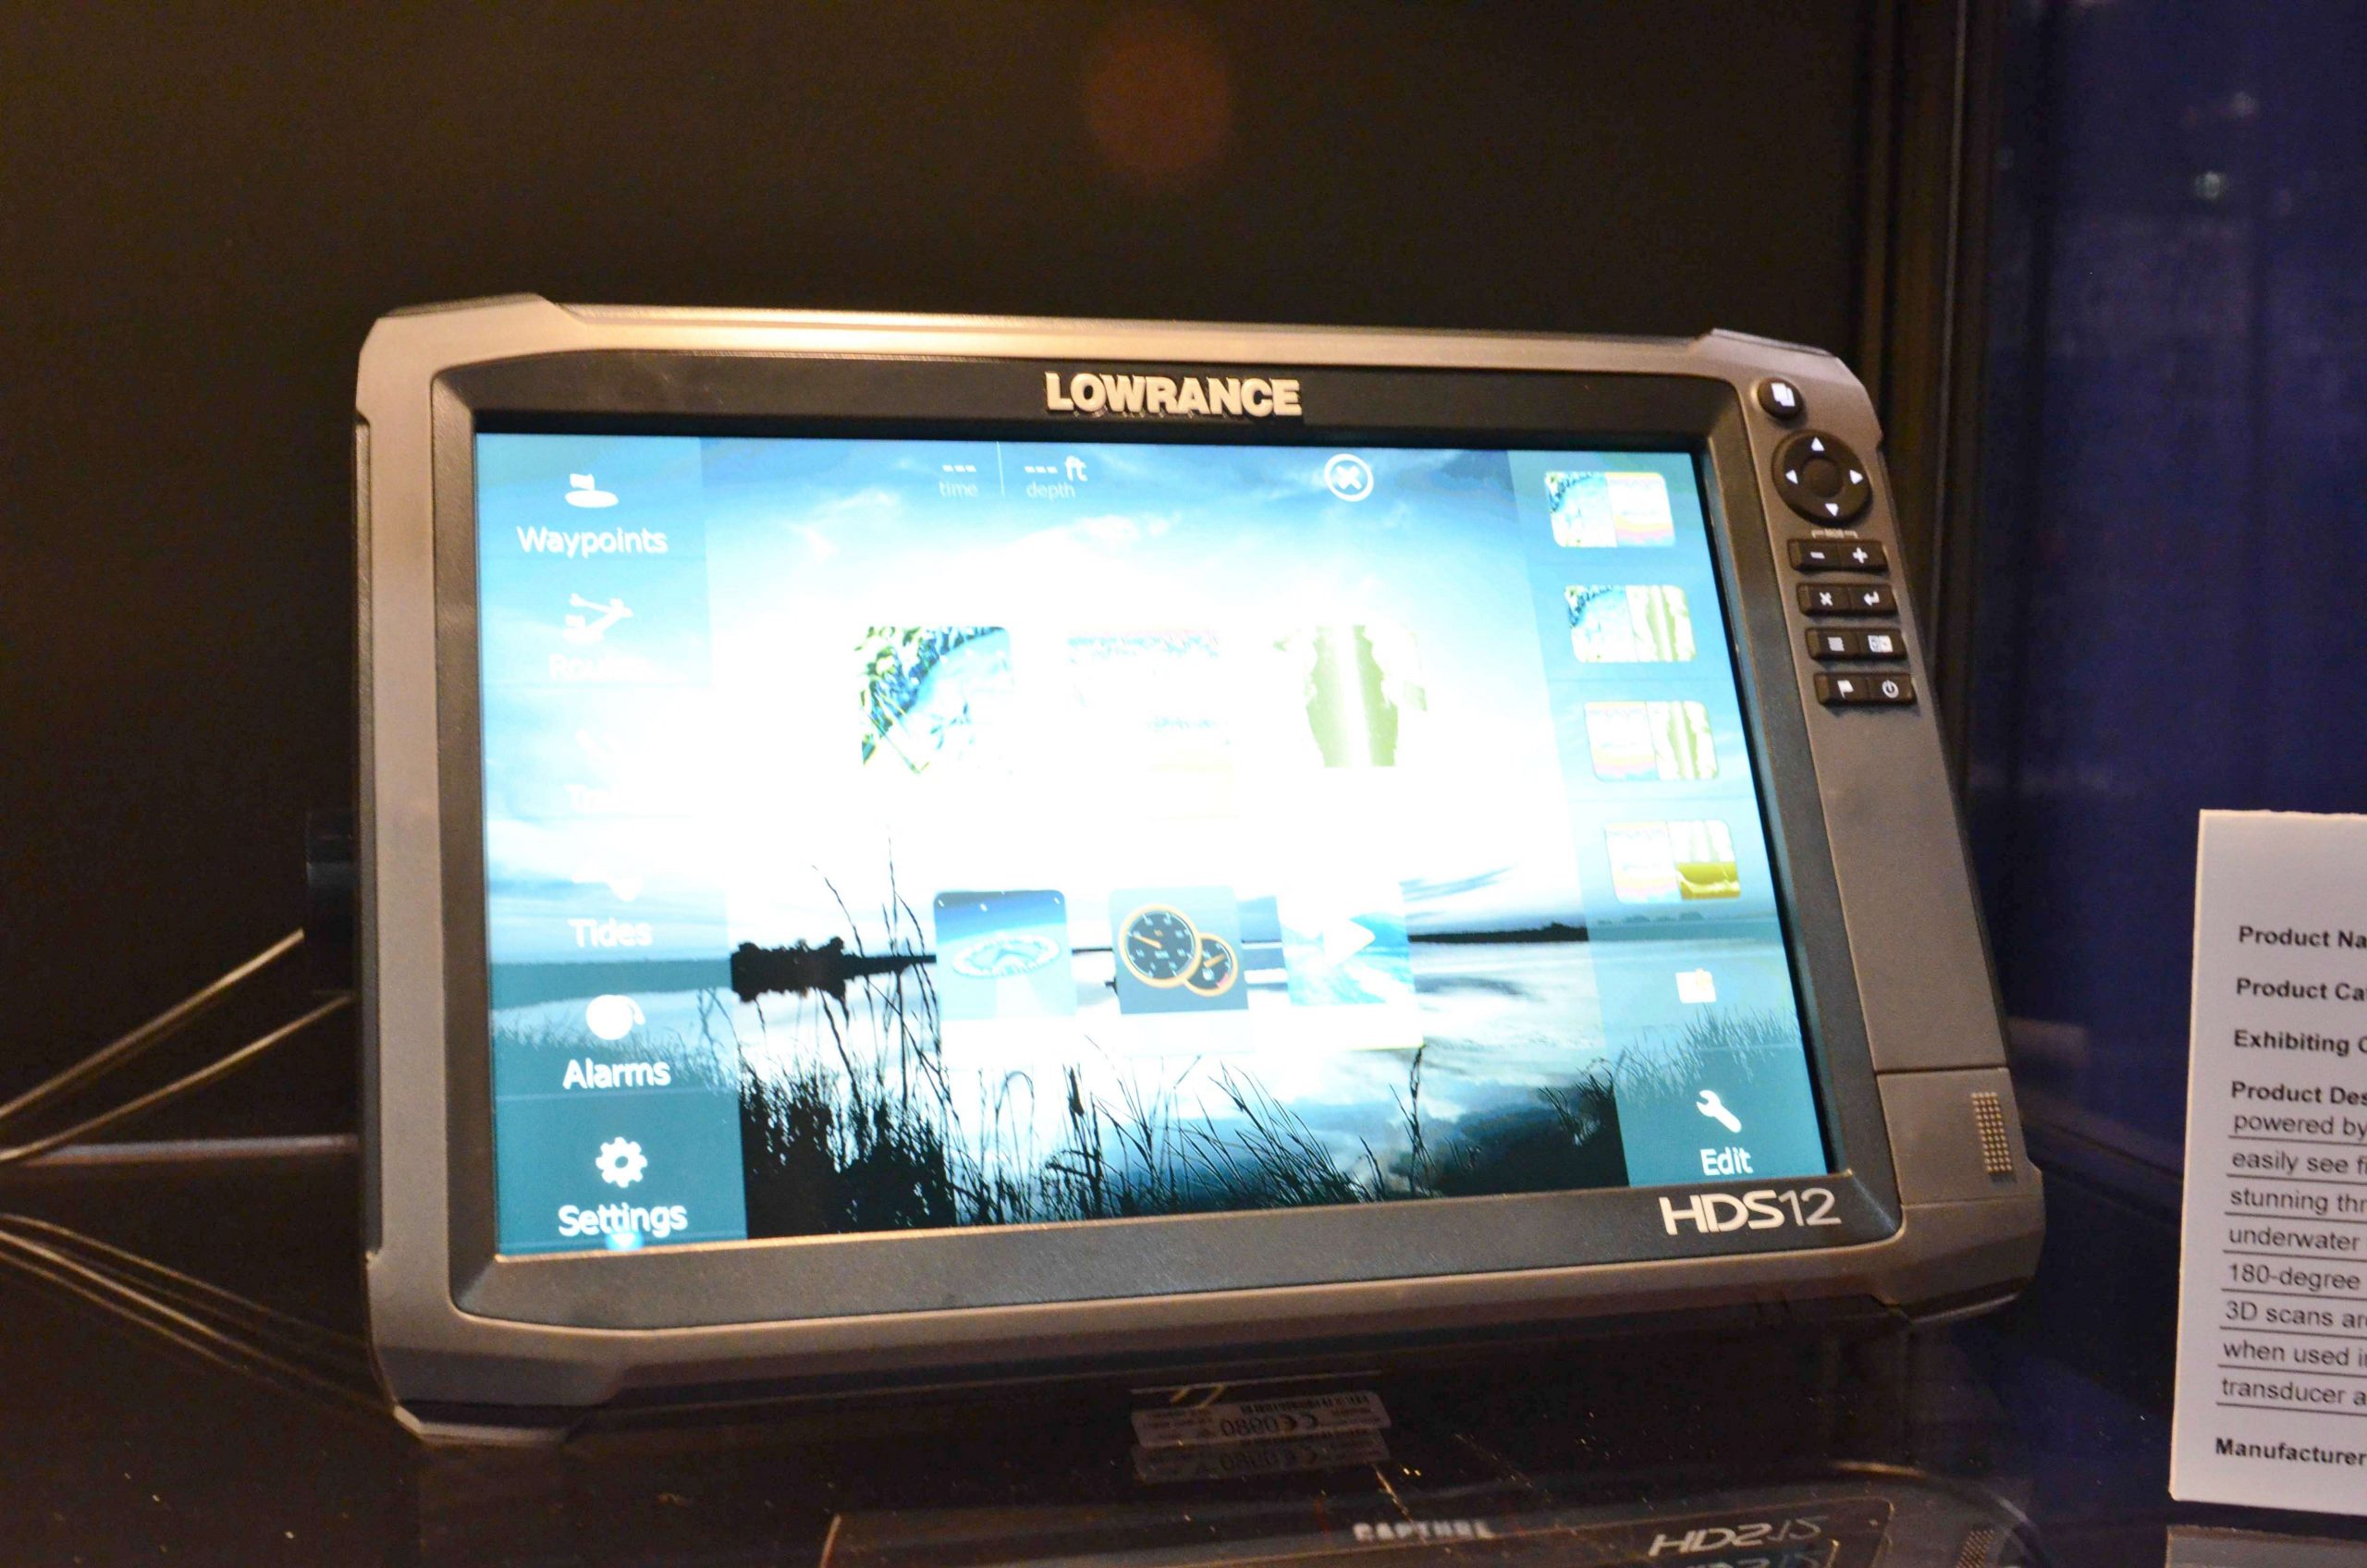 Lowrance's StructureScan 3D quickly and easily scans underwater terrain and structure and creates a three-dimensional display.